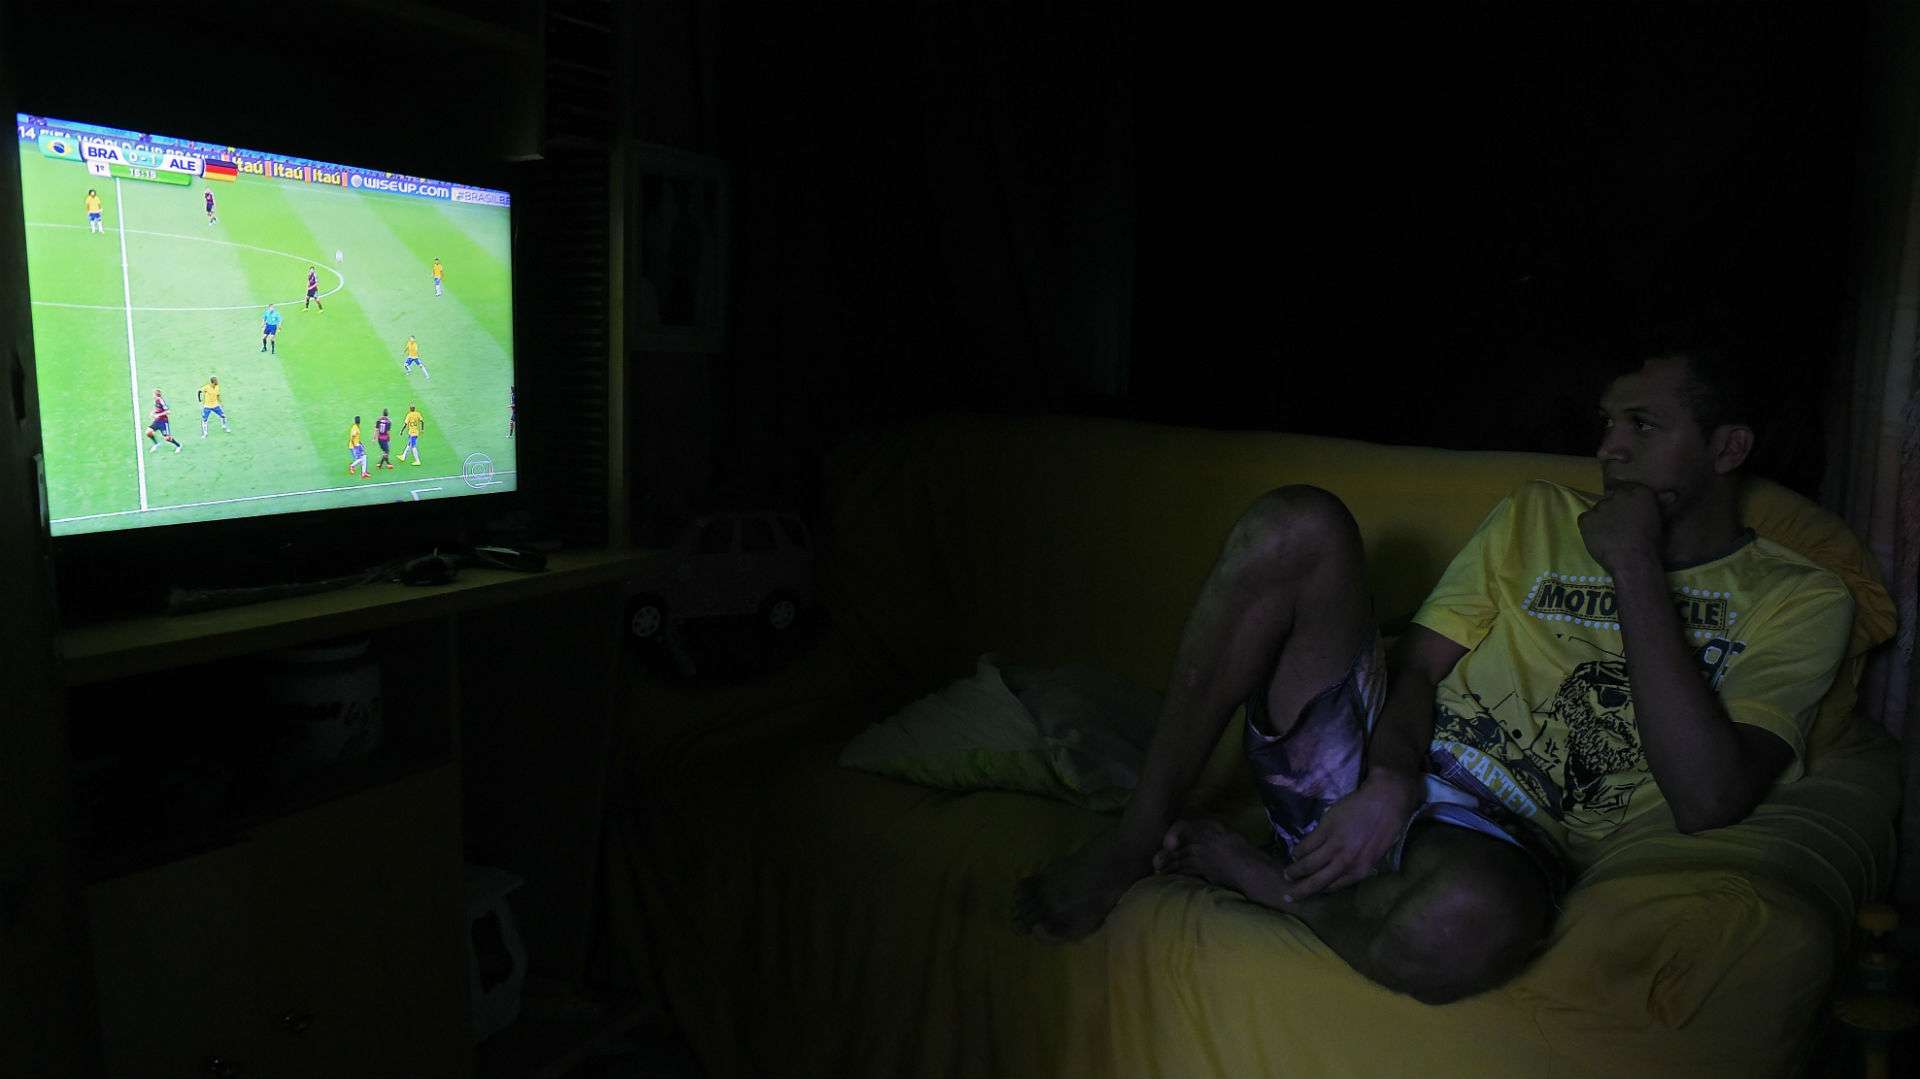 Watching soccer on Tv